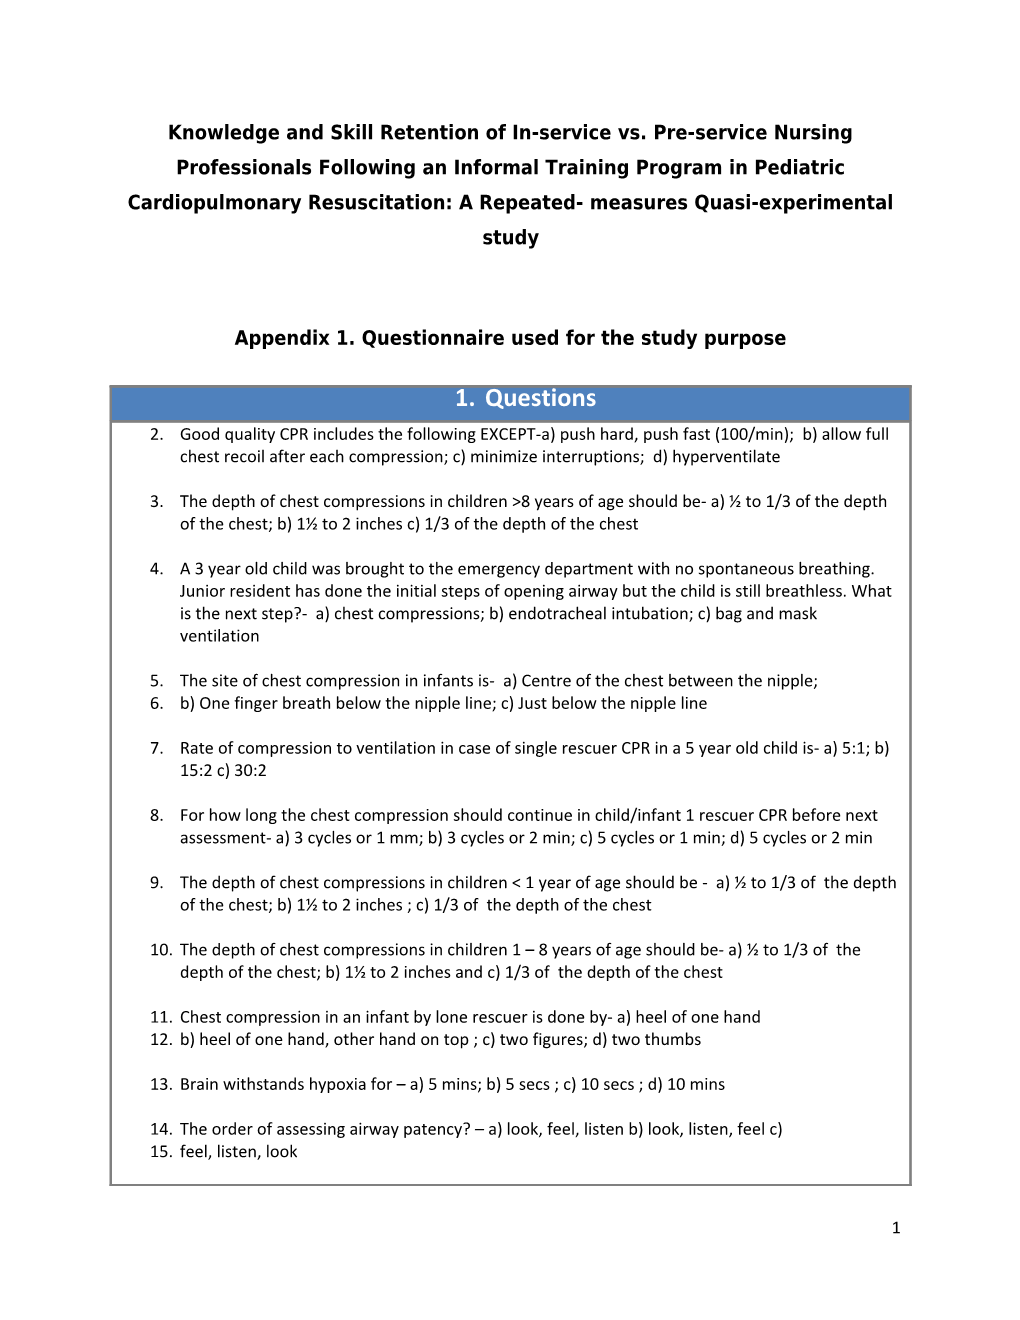 Appendix 1. Questionnaire Used for the Study Purpose